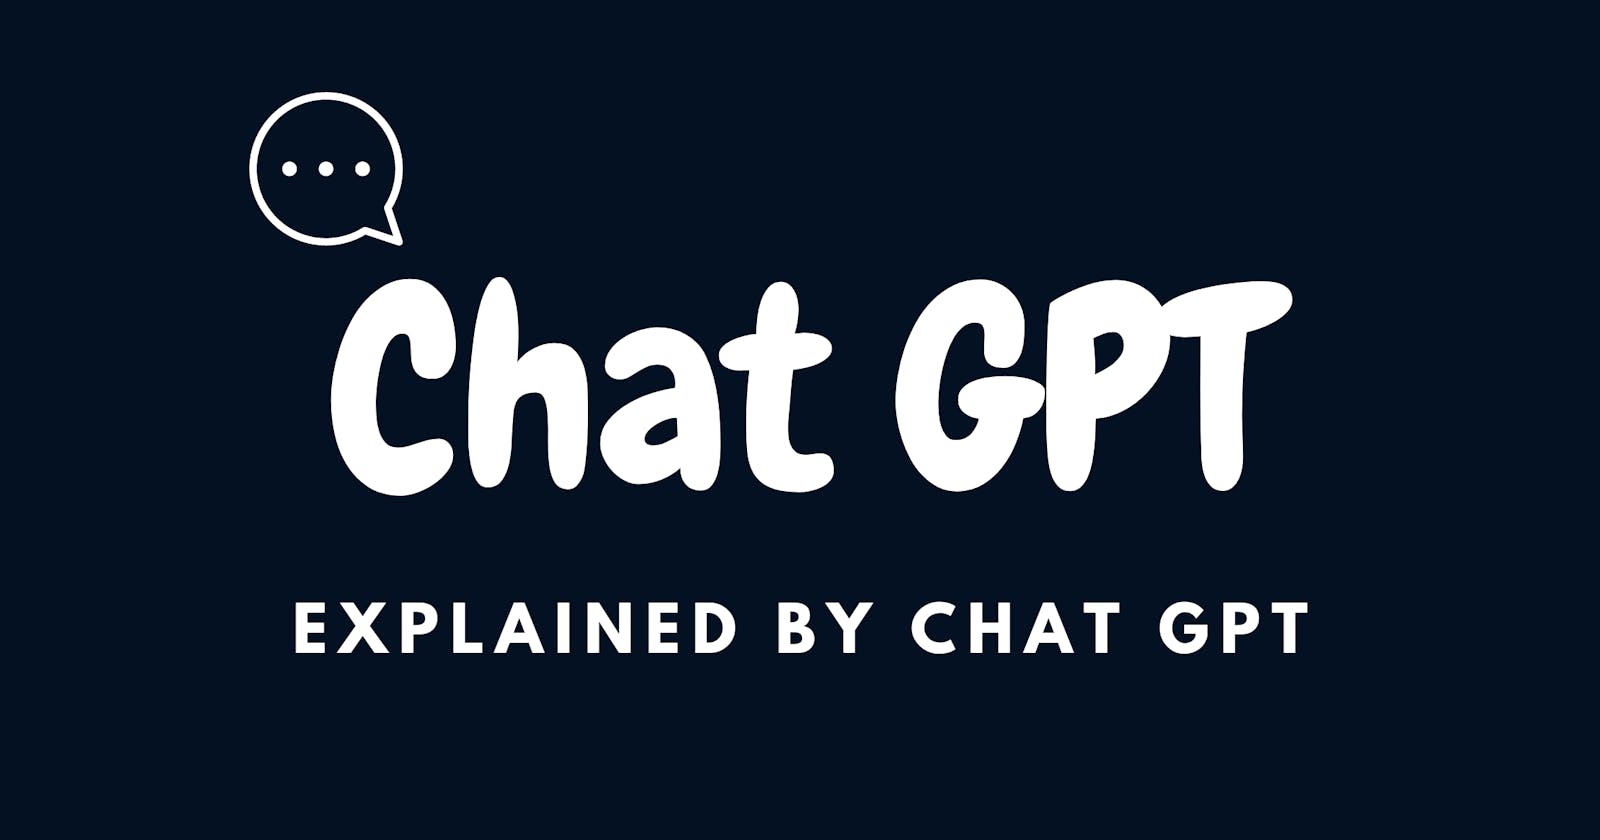 Chat GPT explained by Chat GPT